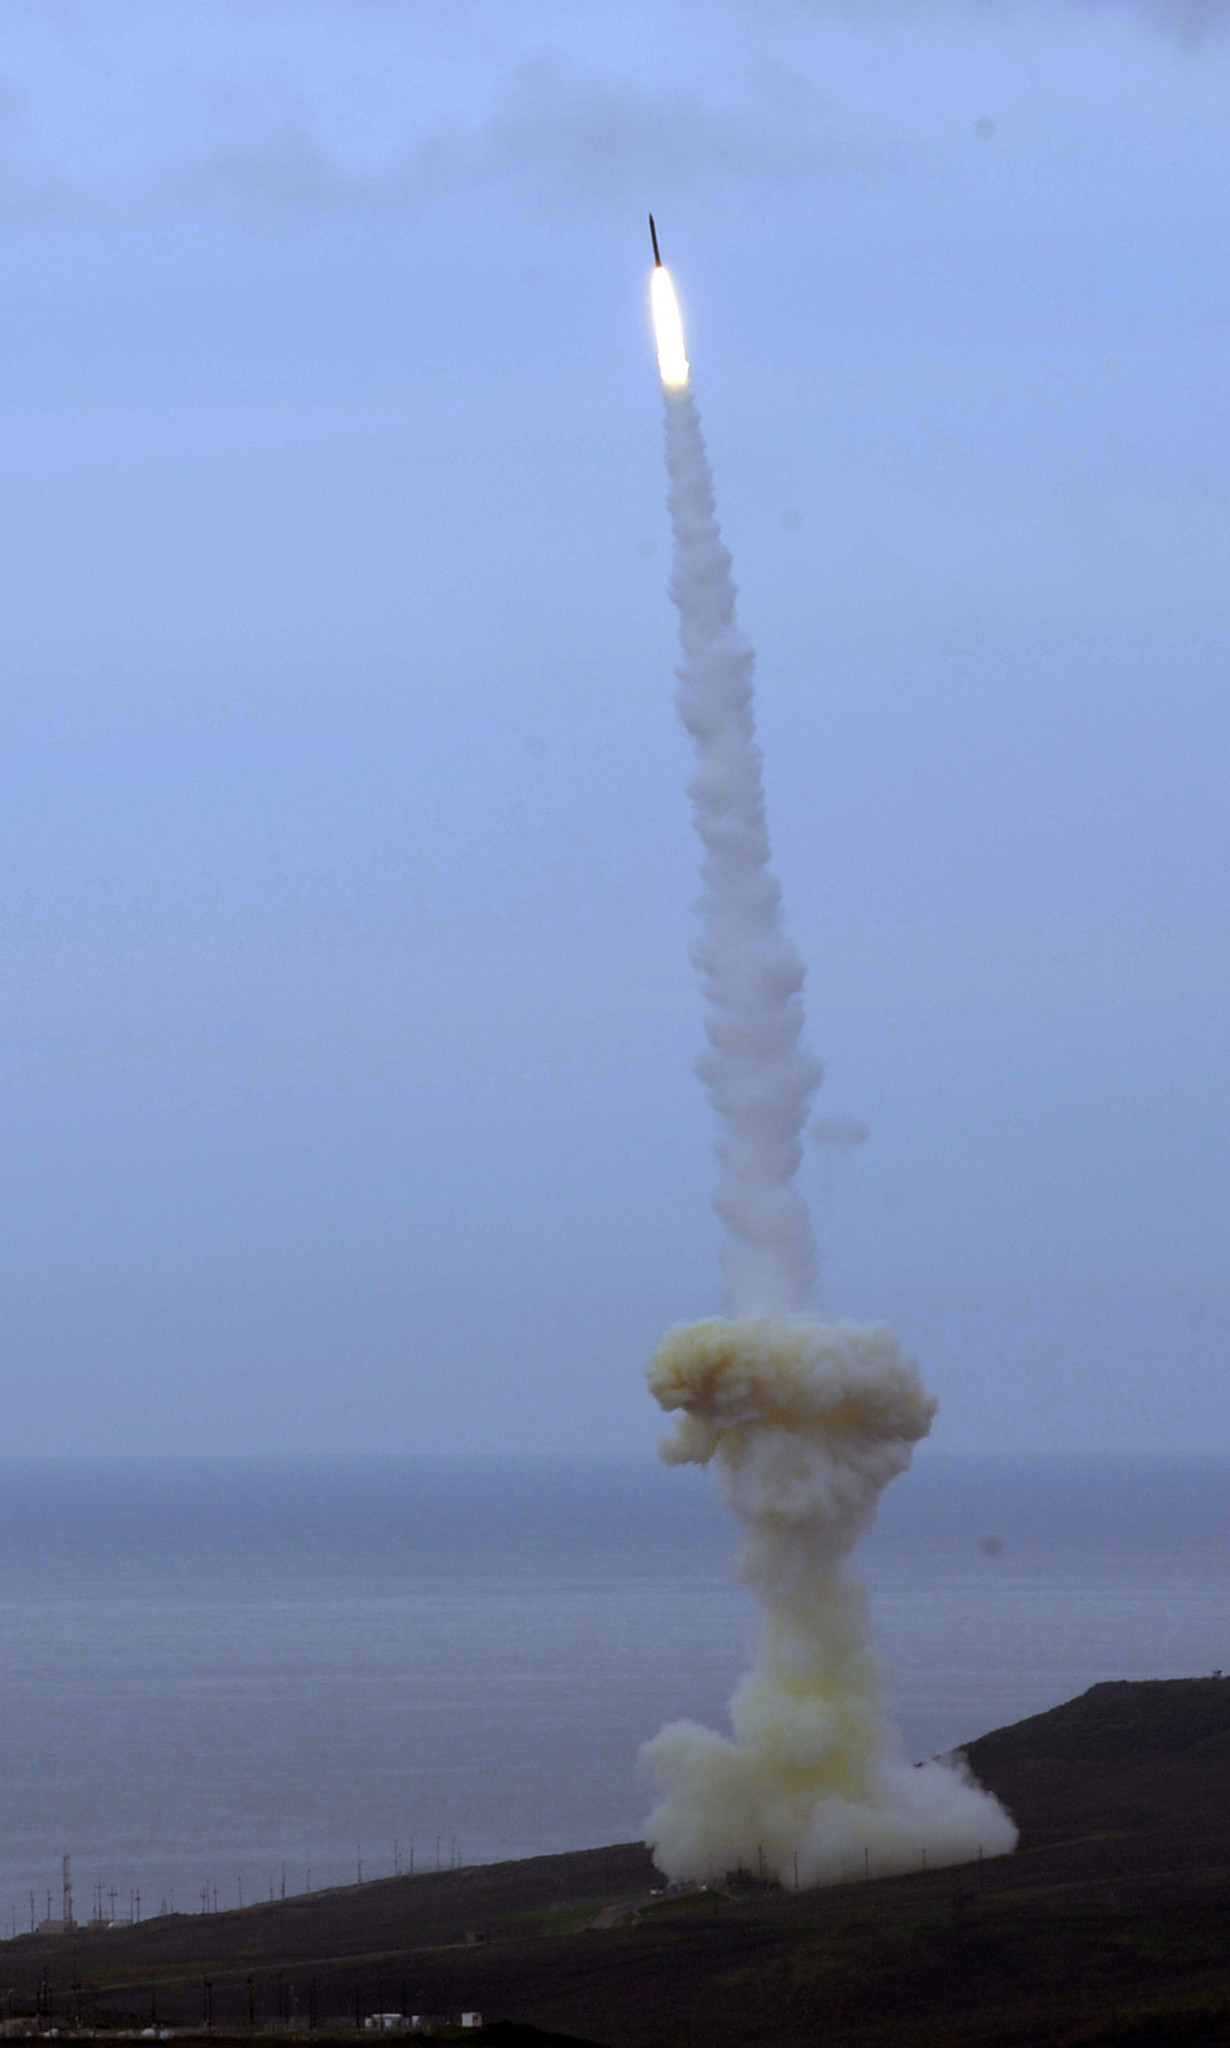 A rocket interceptor is launched from Vandenberg Air Force Base on Dec. 15, 2010. The interceptor's kill vehicle failed to intercept and destroy a mock enemy warhead.